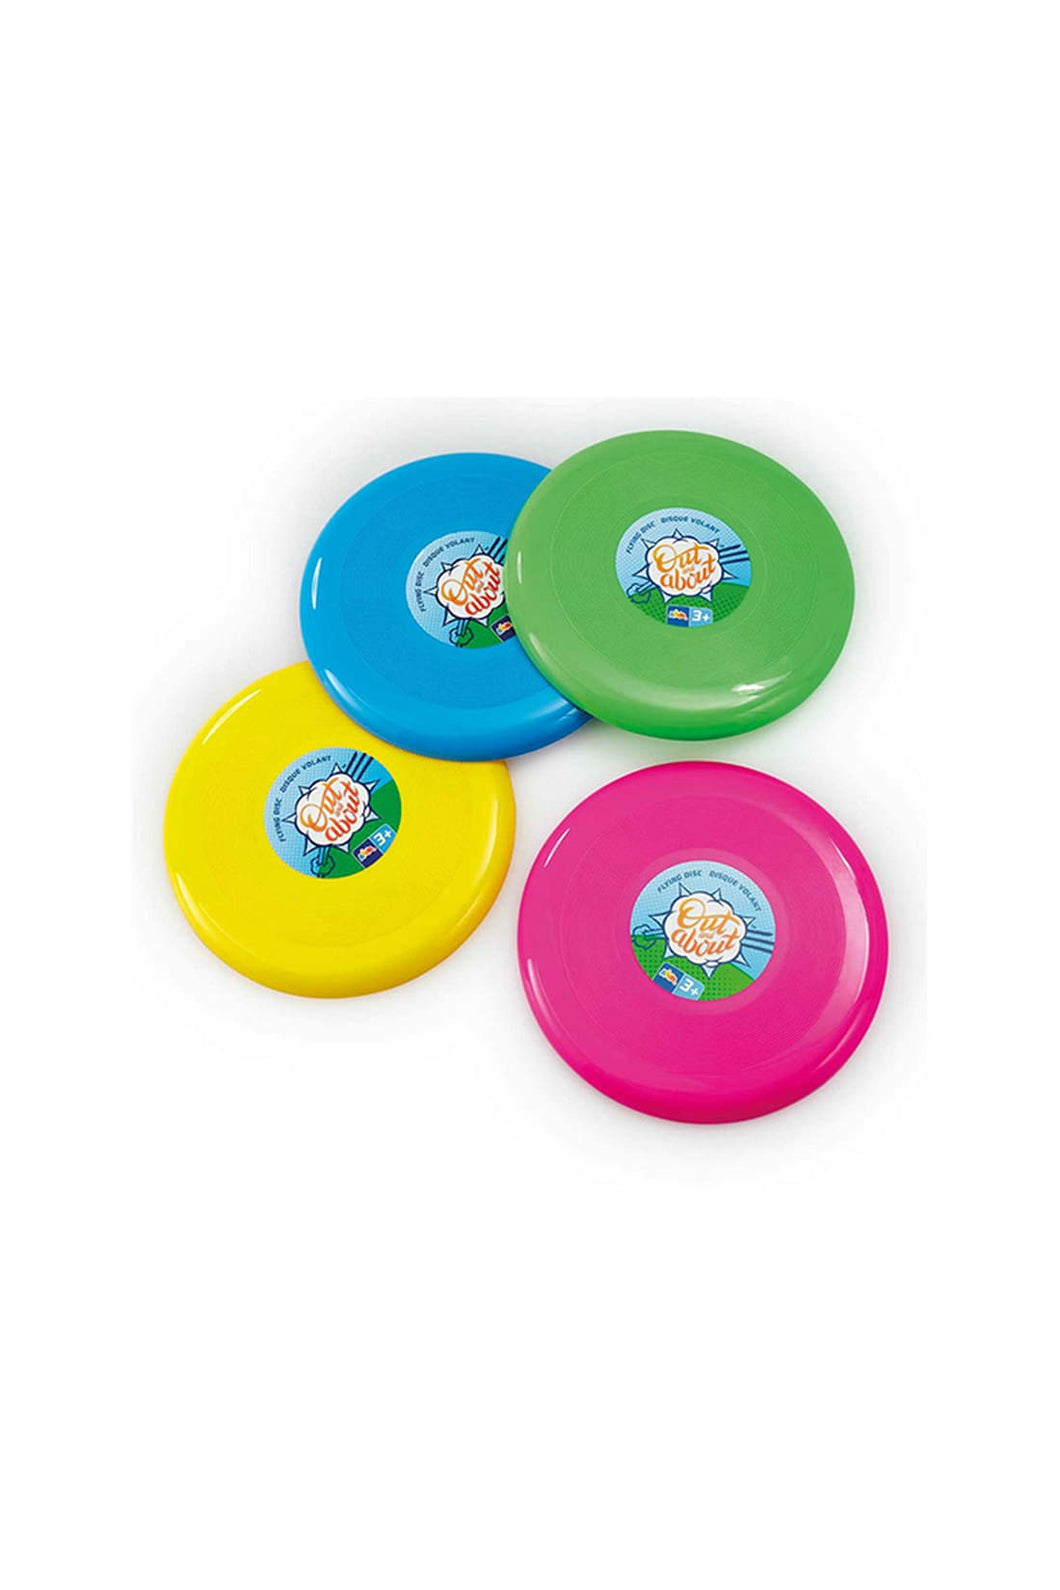 Addo Out And About - Flying Disc Frisbee 25 cm Assorted